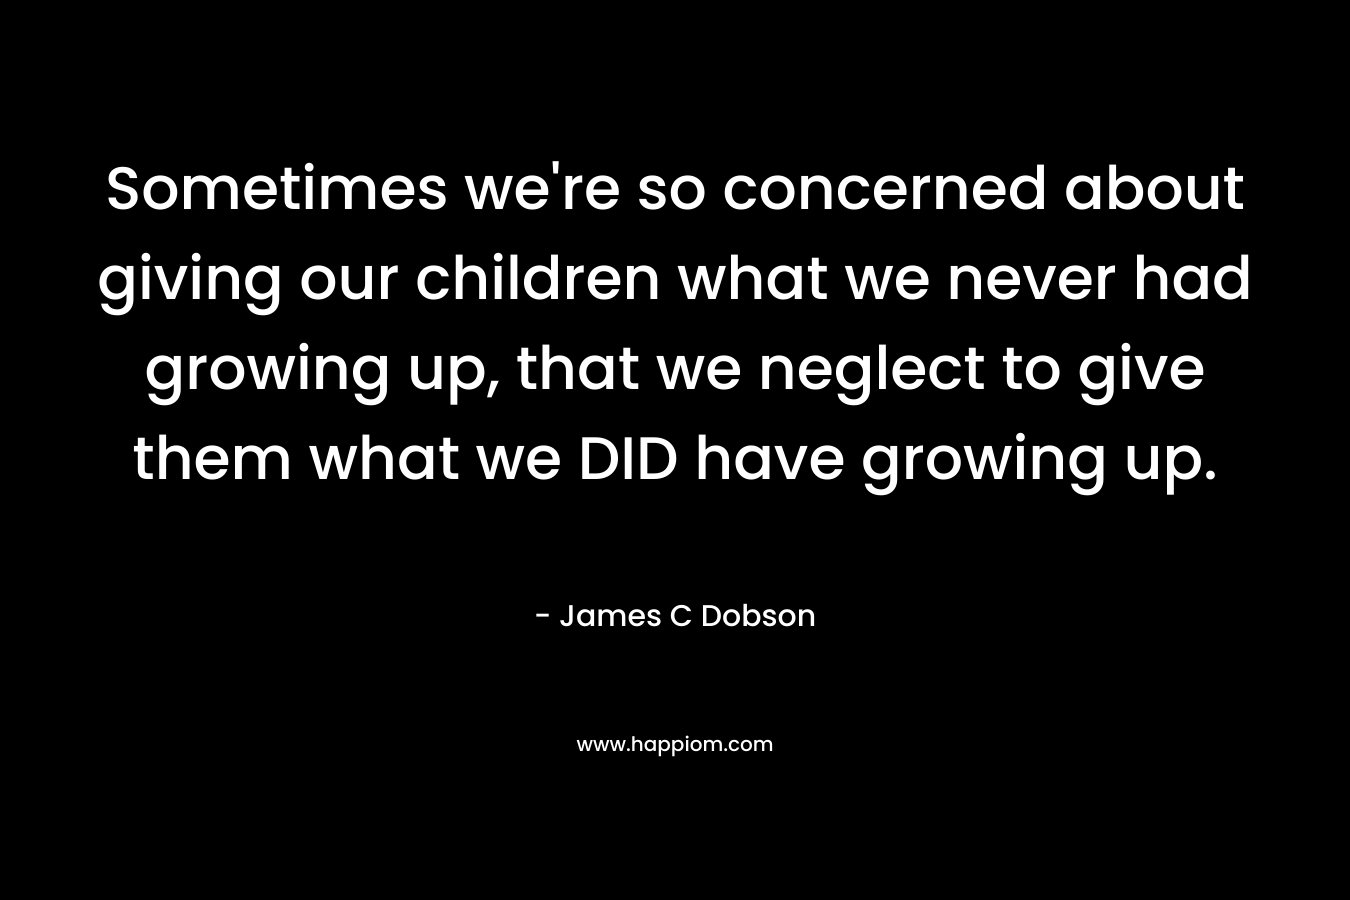 Sometimes we're so concerned about giving our children what we never had growing up, that we neglect to give them what we DID have growing up.